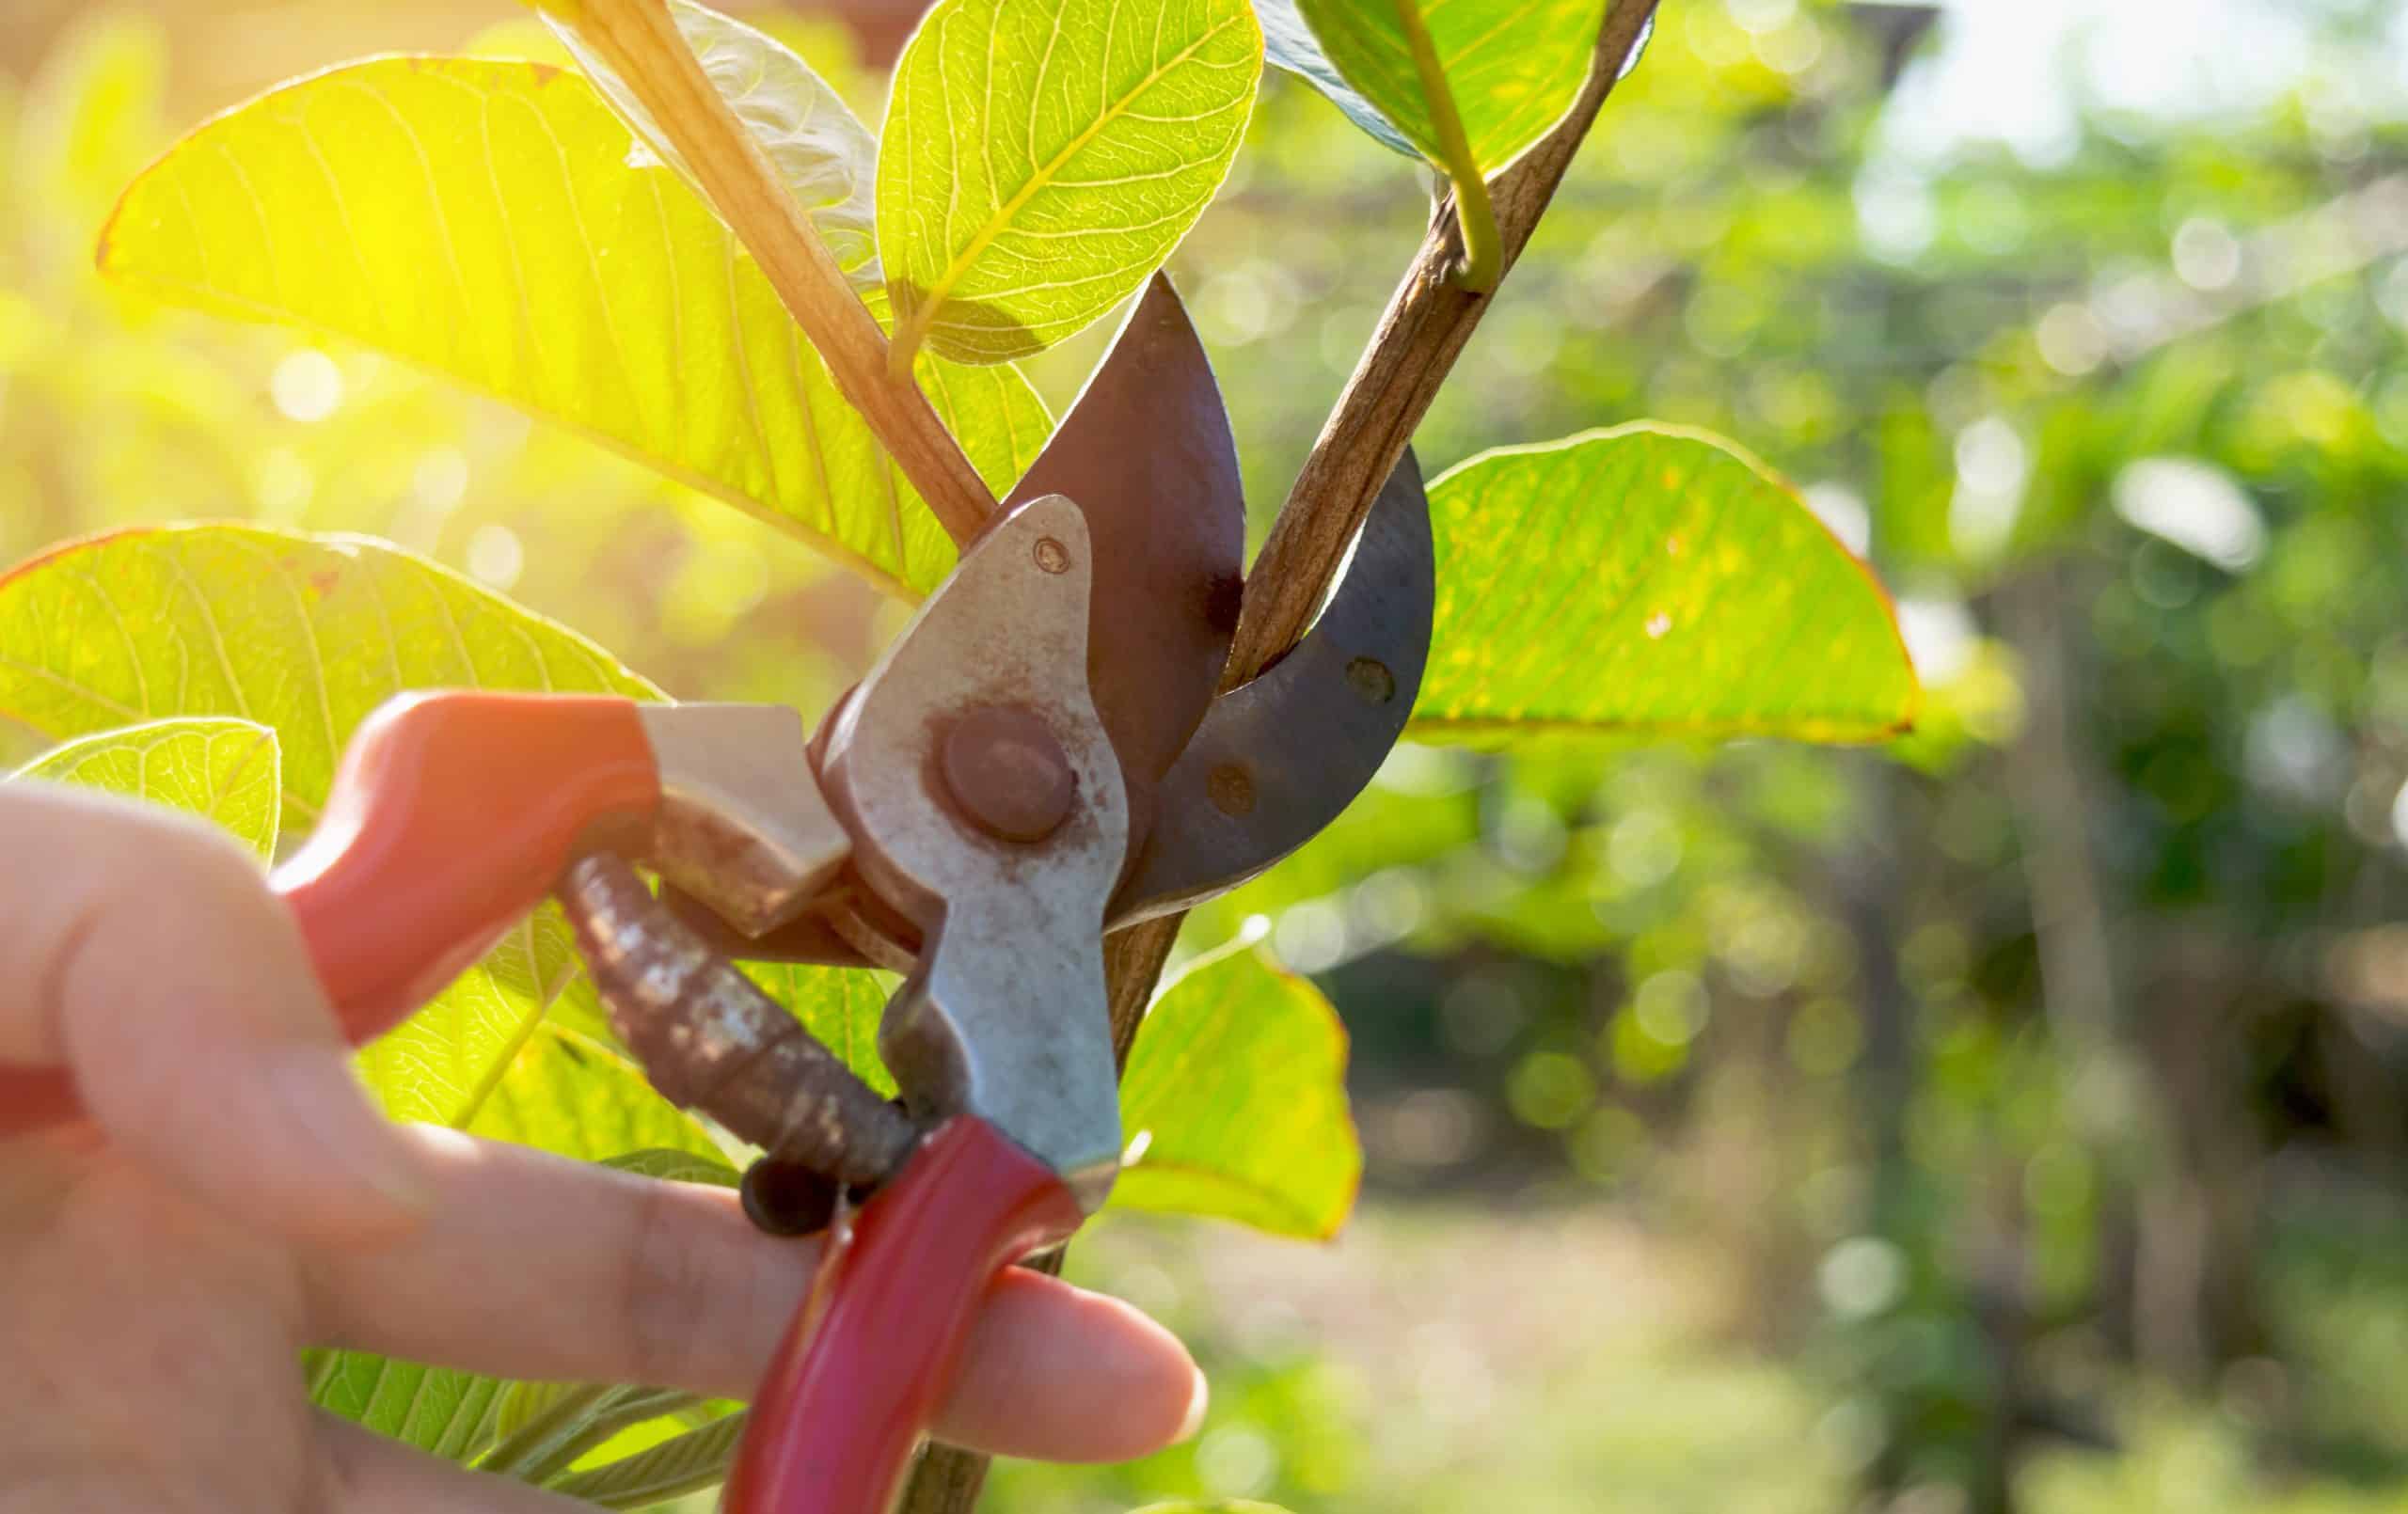 pruning trees with pruning shears in the garden on nature background.